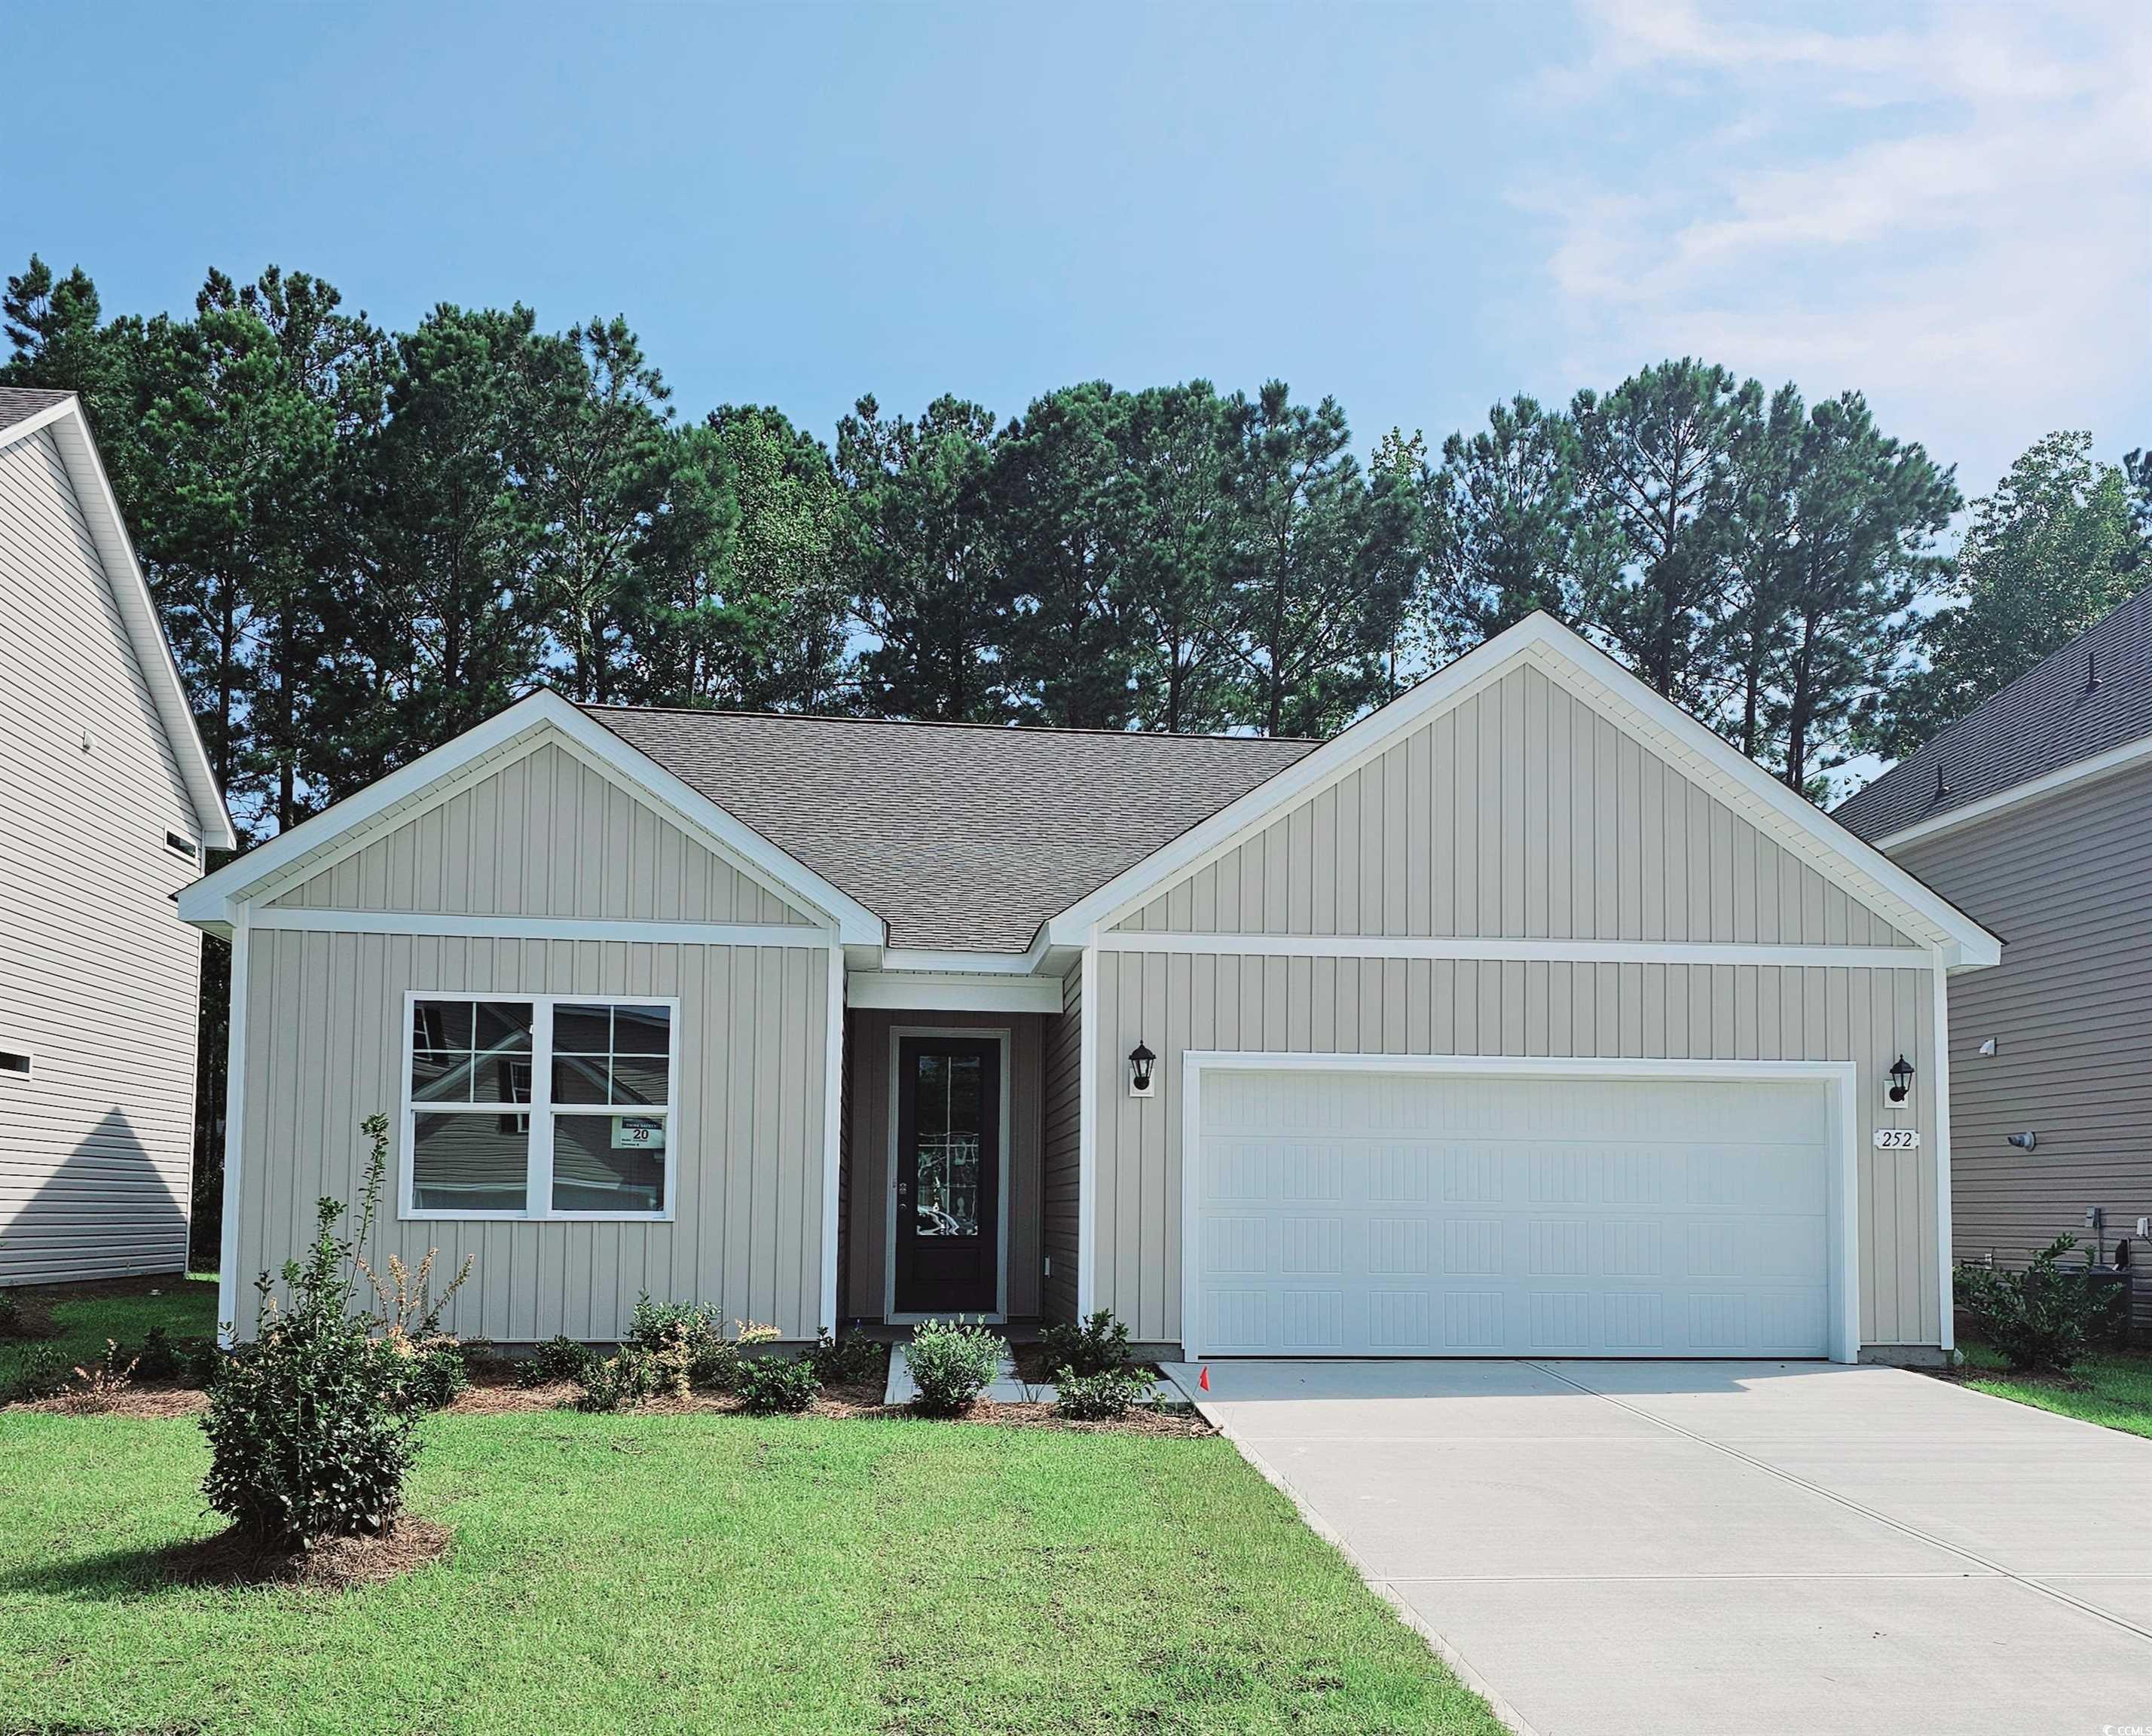 come see out newest community in the murrells inlet conveniently located to all the area has to offer! the litchfield is one of our most desirable single-story homes. this 4 bedroom, 2 bath floorplan offers 11 ft. ceilings and a large open living area. spacious kitchen with breakfast bar/counter height island with quratz counters, corner walk-in pantry, stainless steel appliances with a natural gas cooking and 36" cabinets. other features include an upgraded 4 panel sliding glass door leading to the oversized back porch. owners' suite has double closets, walk-in tiled shower, linen closet, and double vanity.      this is america's smart home! each of our homes comes with an industry leading smart home technology package that will allow you to control the thermostat, front door light and lock, and video doorbell from your smartphone or with voice commands to alexa. *photos are of a similar litchfield home.  (home and community information, including pricing, included features, terms, availability and amenities, are subject to change prior to sale at any time without notice or obligation. square footages are approximate. pictures, photographs, colors, features, and sizes are for illustration purposes only and will vary from the homes as built. equal housing opportunity builder.)